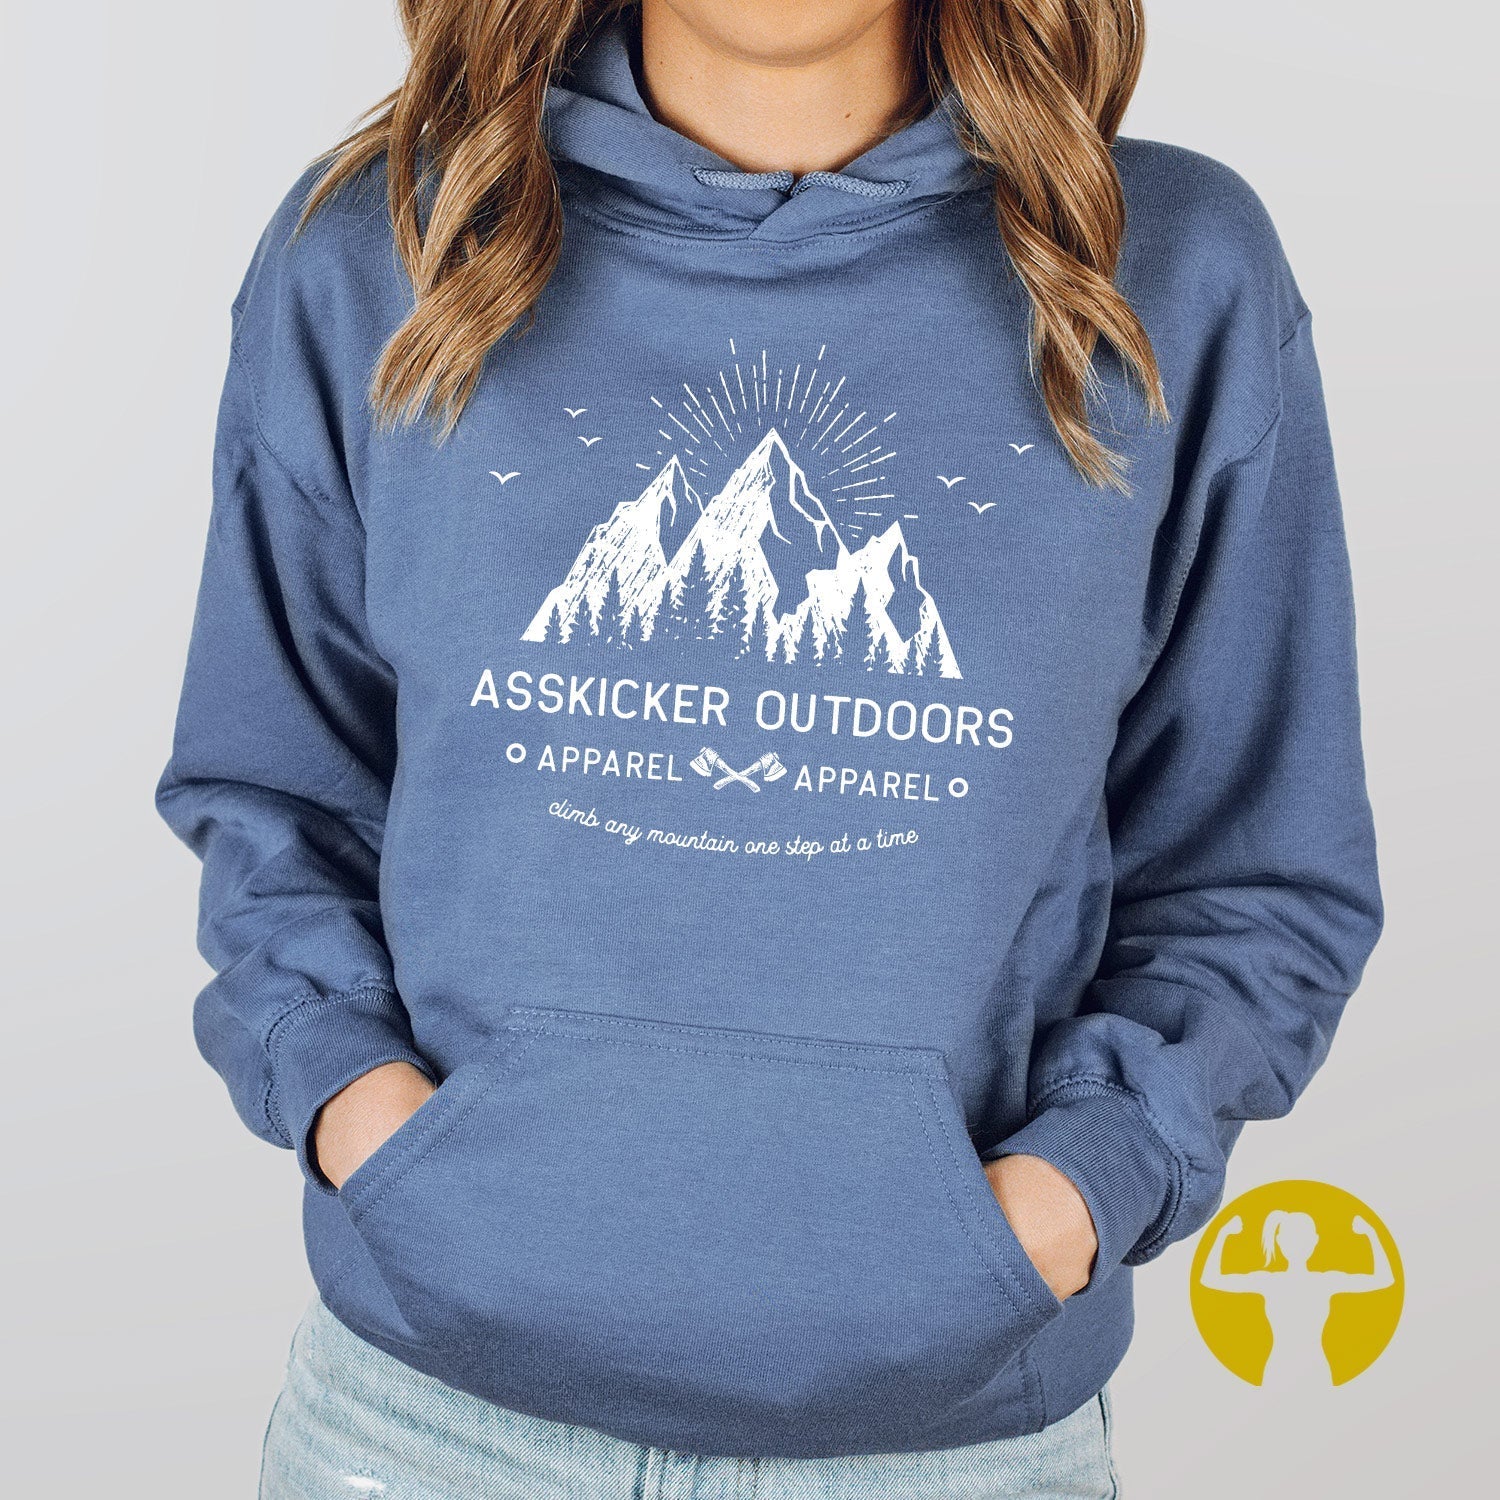 Climb Any Mountain One Step at a Time Hoodie (XS-5X)